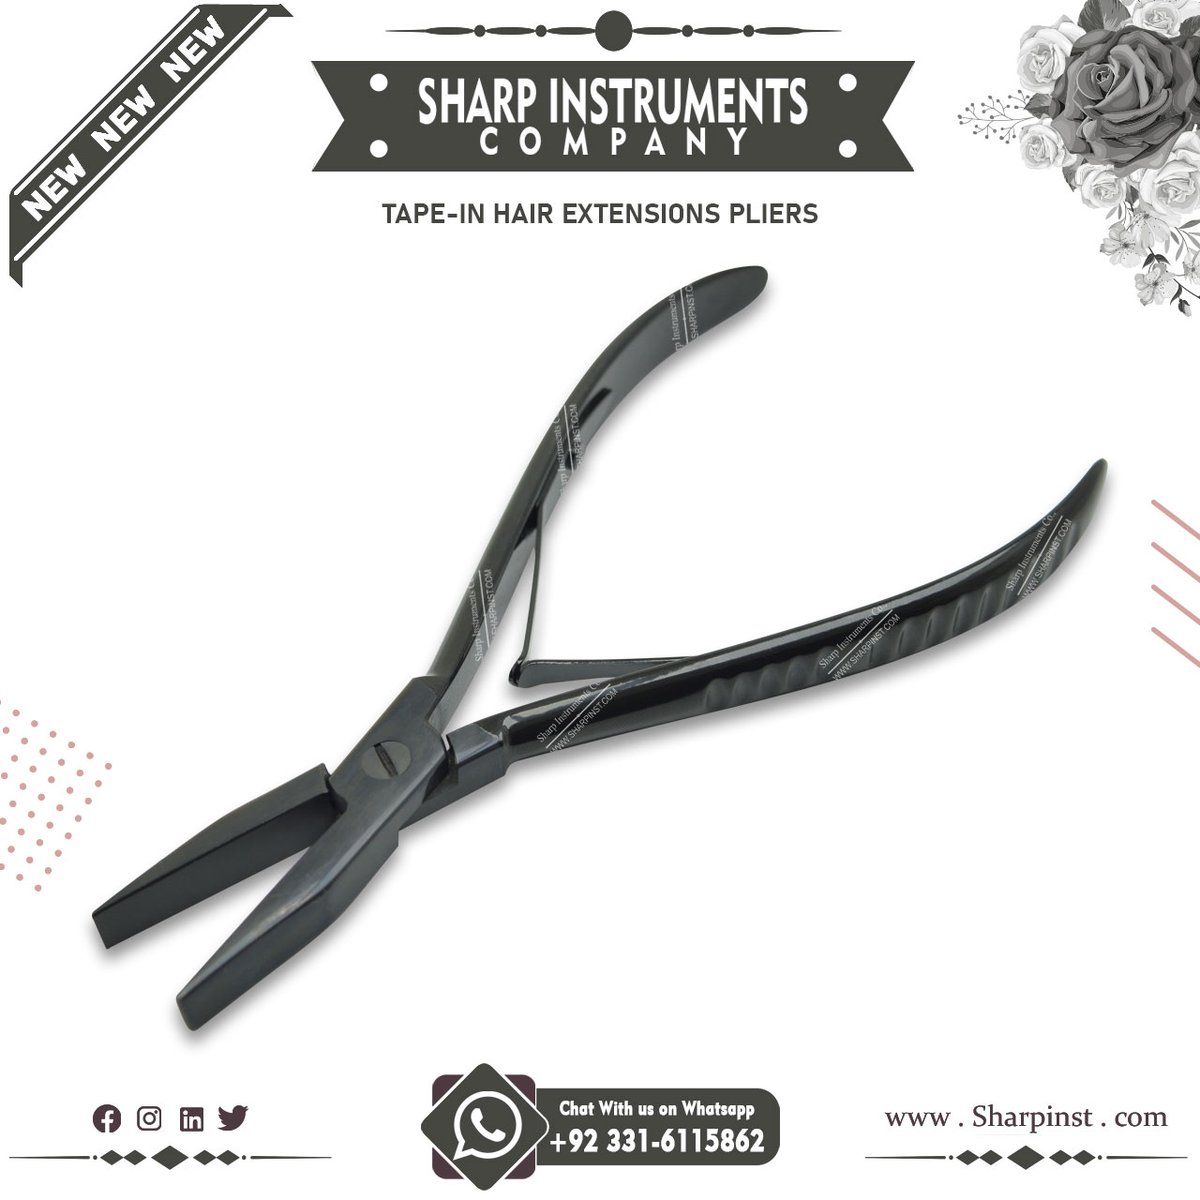 Tape Hair Extension Pliers.
Suitable for the application and maintenance of Tape Hair Extensions.  7″ Flat Mouth Pliers. #hairextensioncourse #hairextensioncoursecardiff #hairextensioncoursebristol #onlinehairextensioncourse #vhairacademy #hairextensionholder